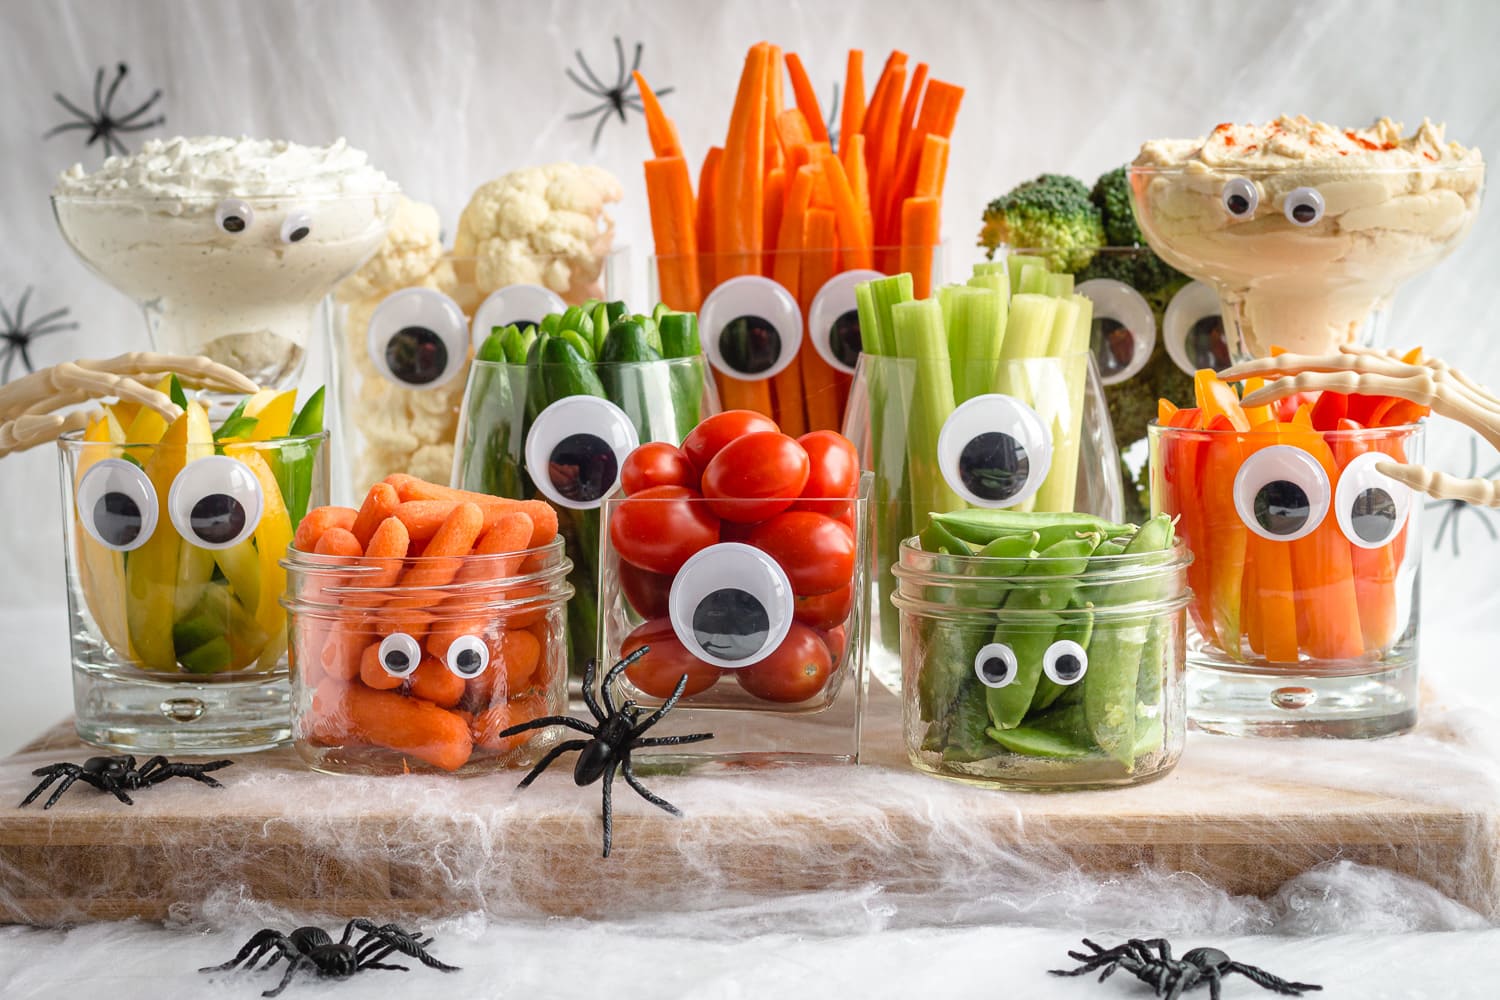 A Halloween veggie tray featuring "monsters" made from glassware with googly eyes which are then filled with a variety of different veggies and dip.